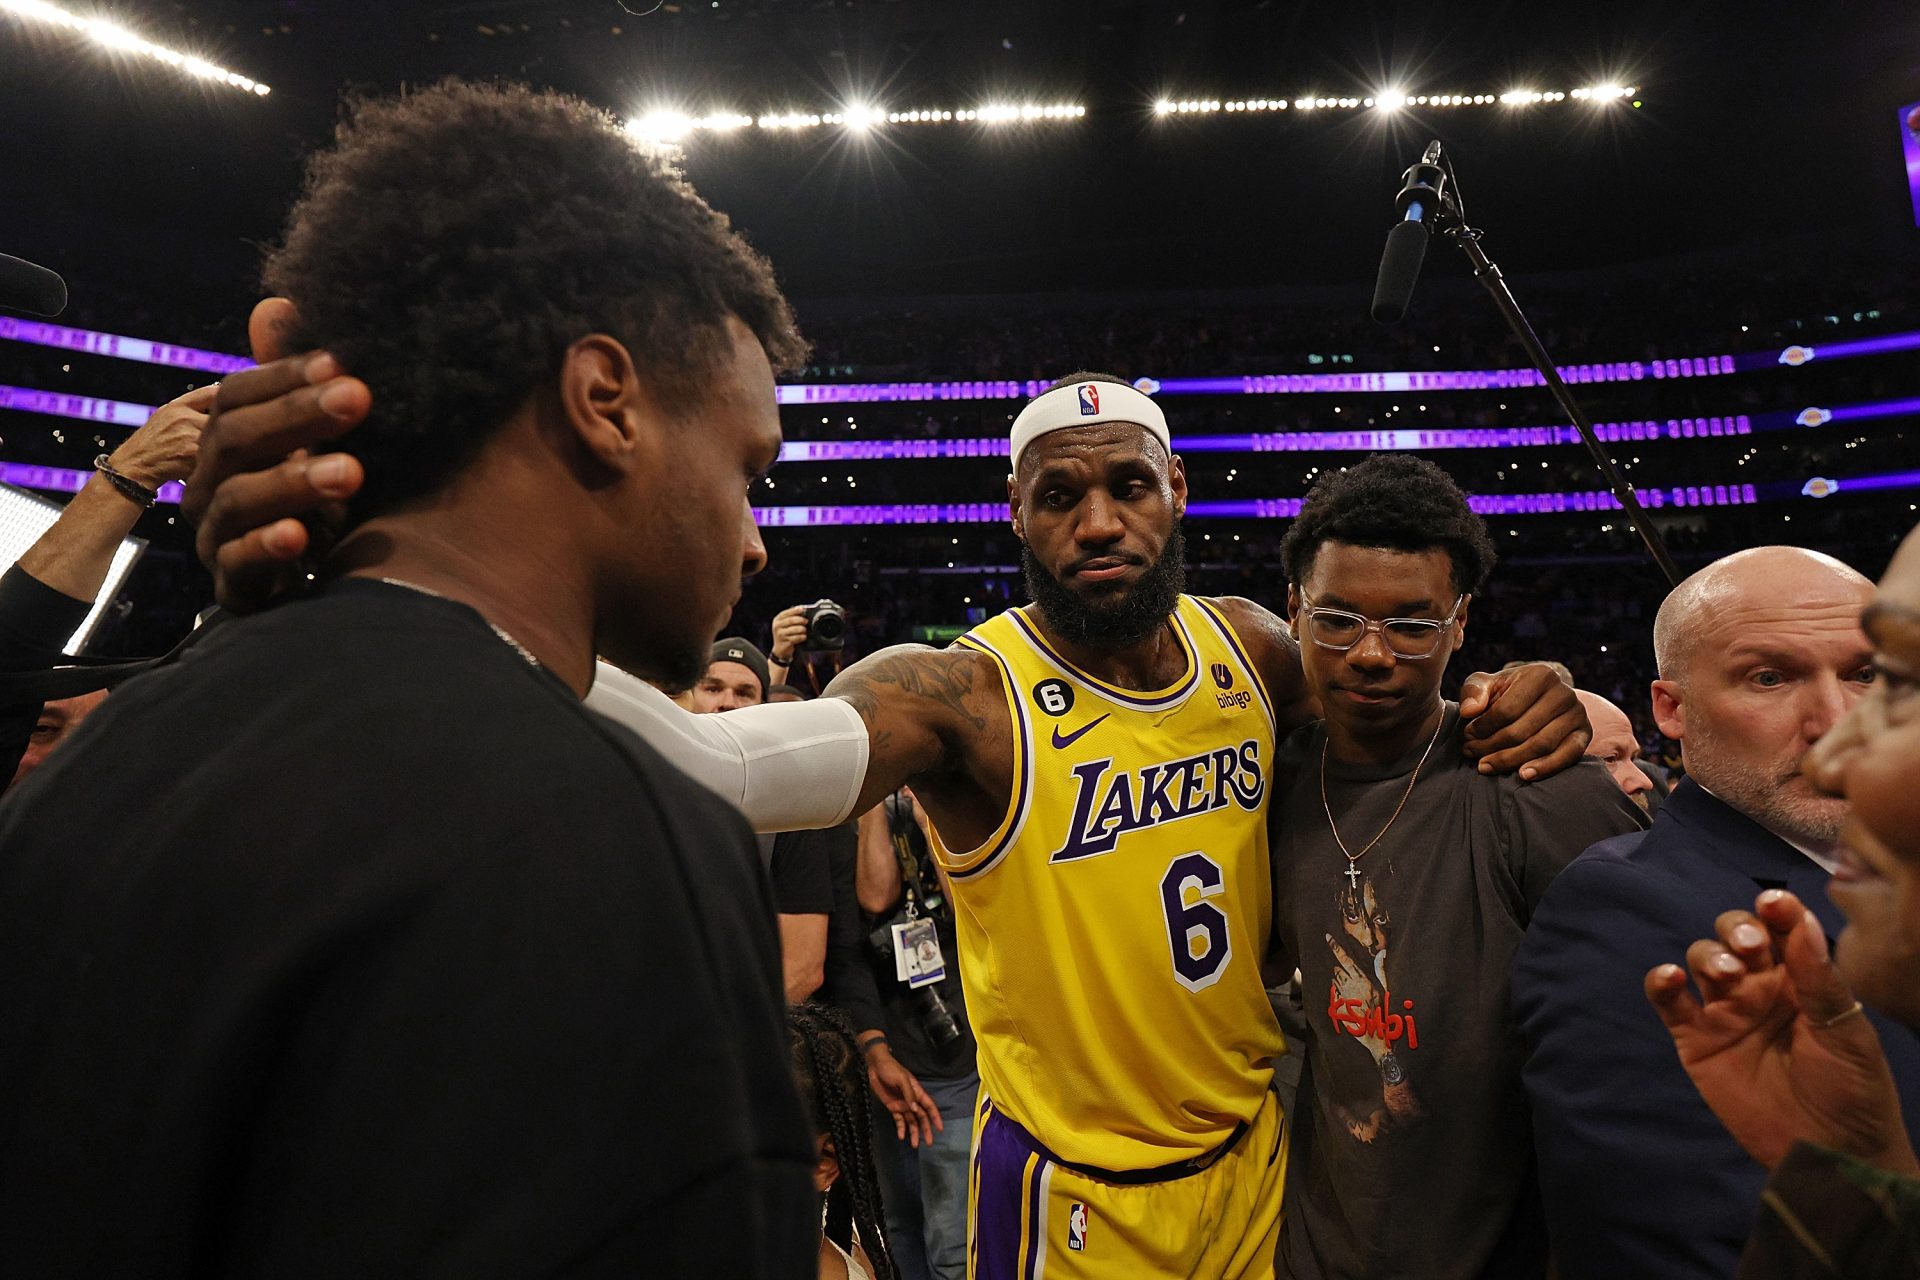 LeBron James wants to stay in the NBA long enough to play with both his sons